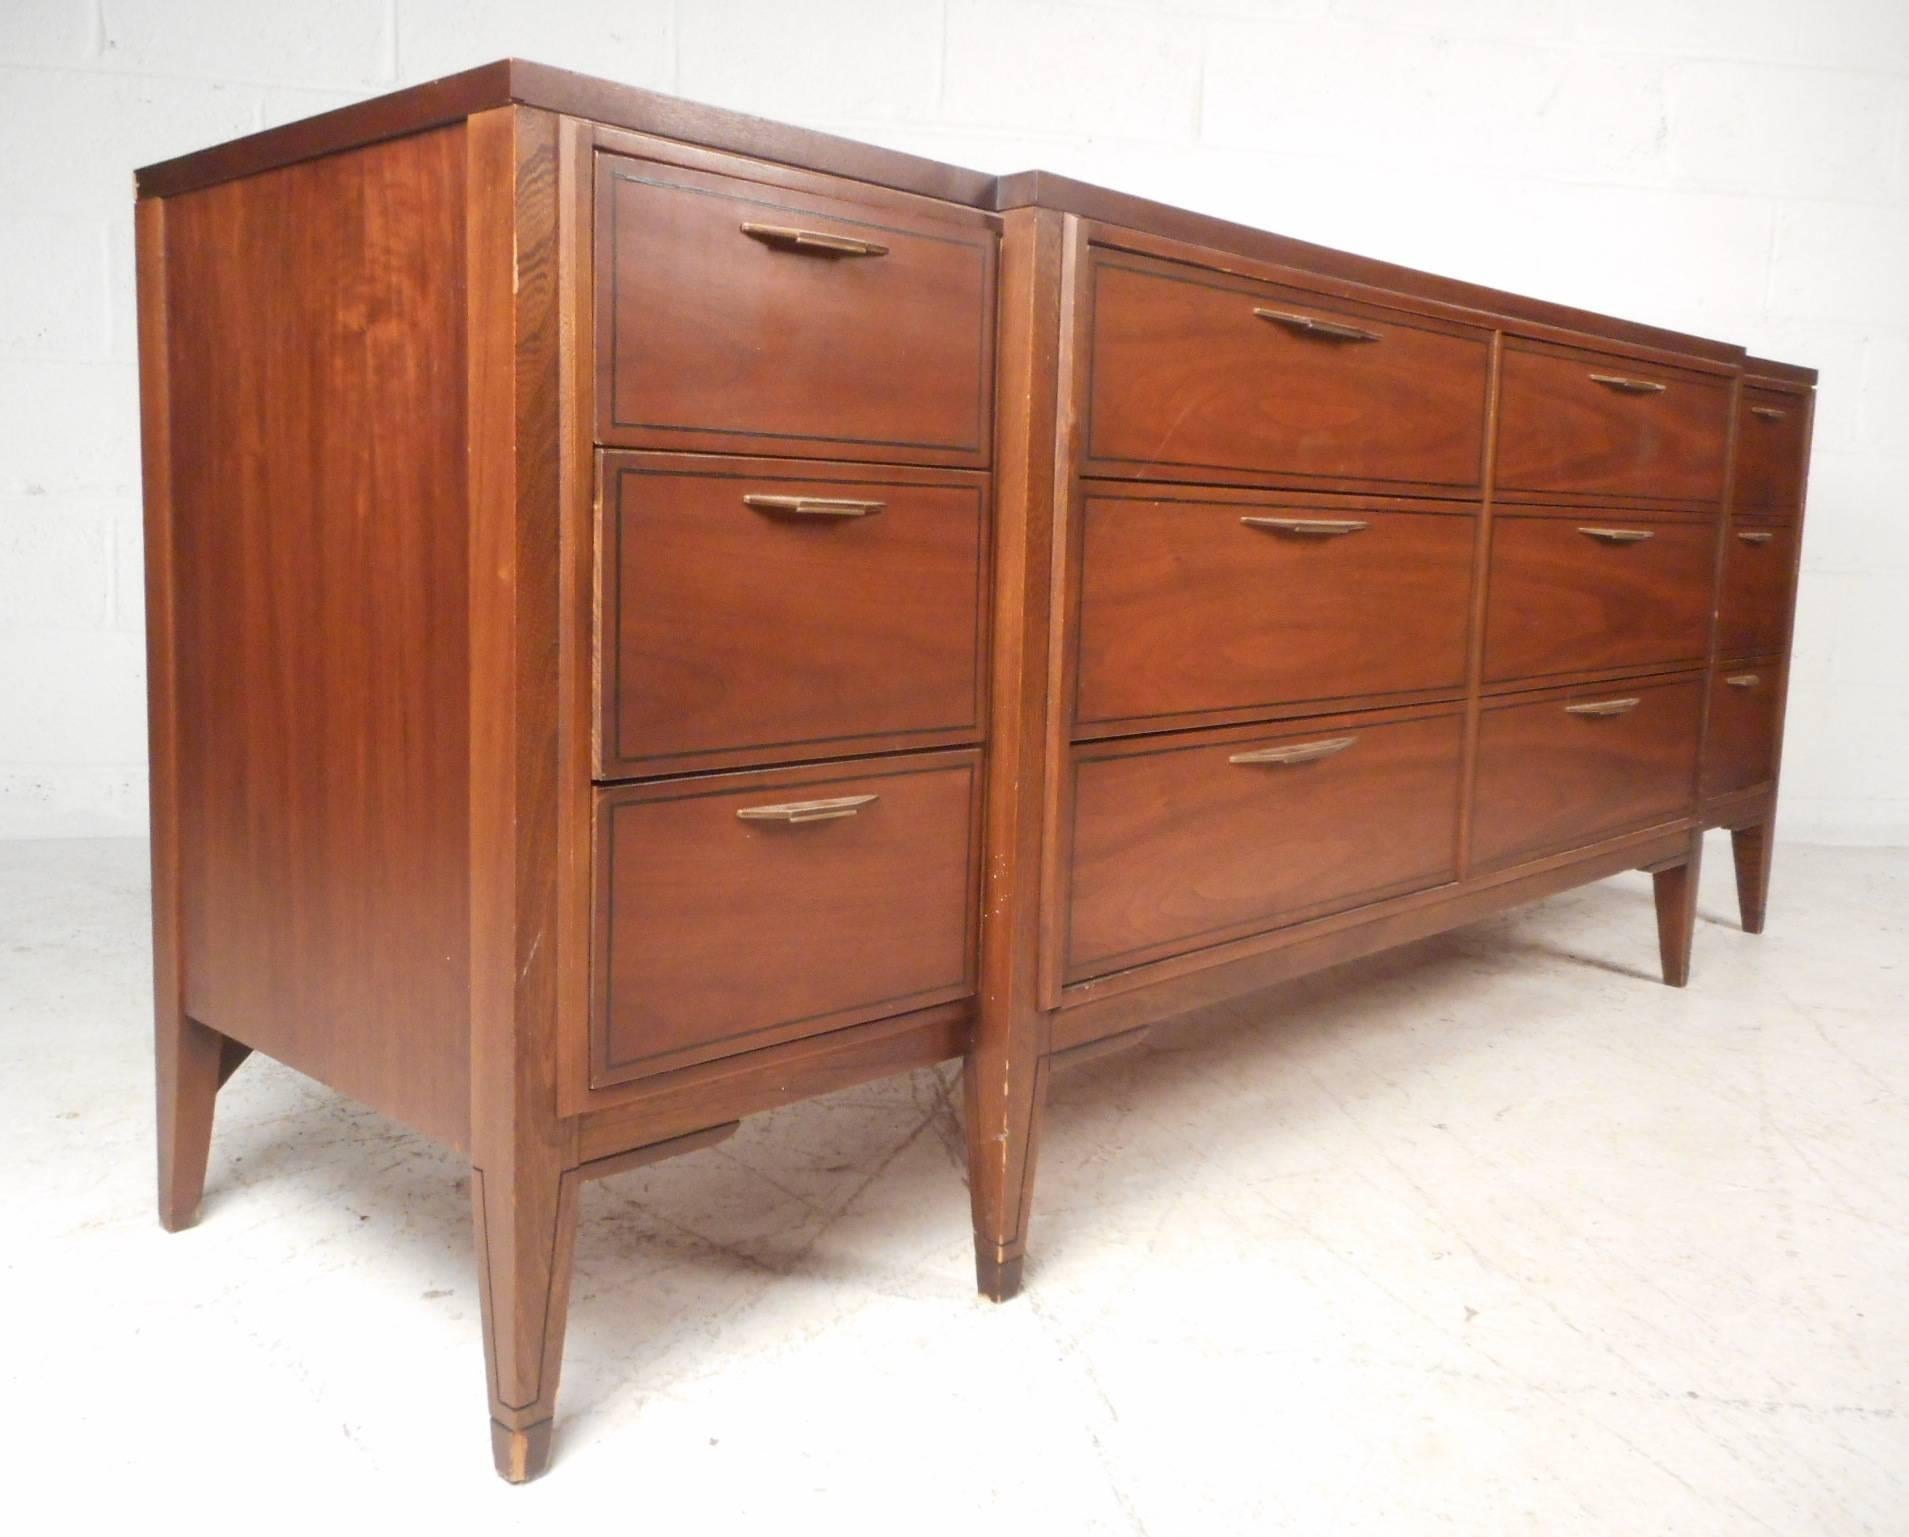 This stunning vintage modern dresser features a sculpted front with twelve drawers. Sleek design offers plenty of room for storage without sacrificing style. Extremely unique case piece with sculpted pulls, splayed legs, and a center that protrudes